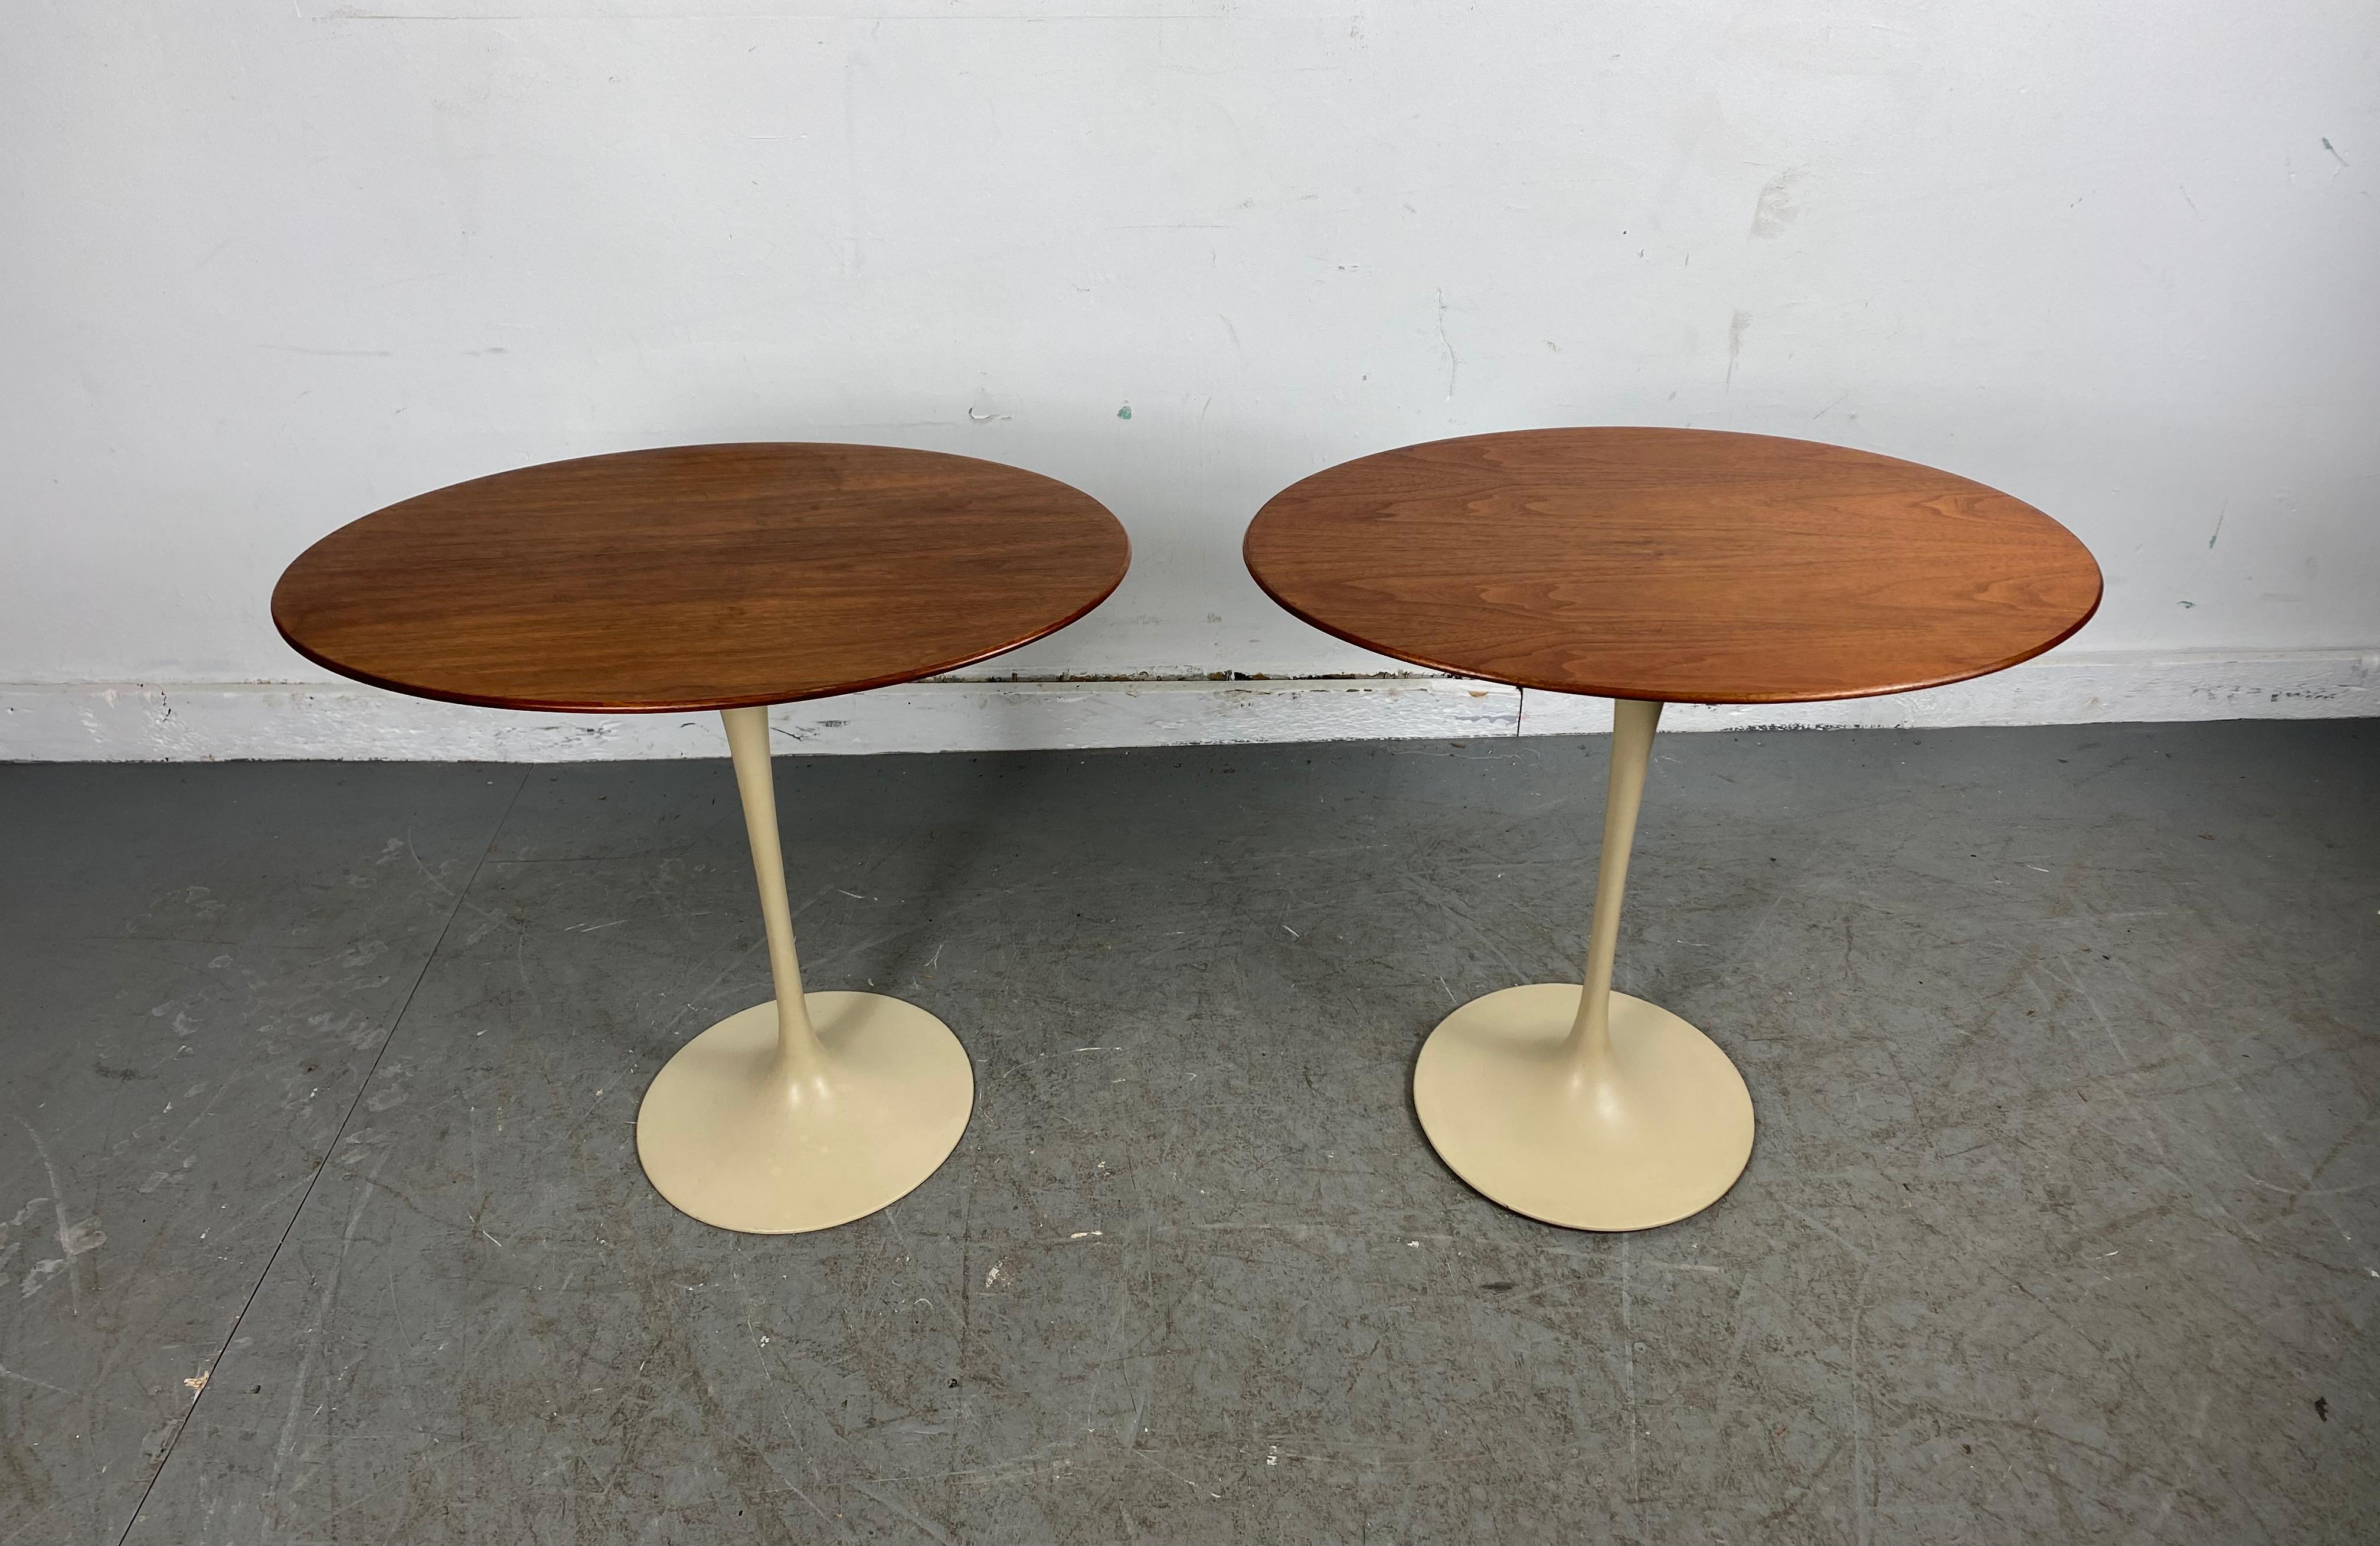 Early pair of Knoll tulip oval side tables by Eero Saarinen, circa 1970s. Walnut oval beveled tops, ivory white tulip pedestals. Nice original condition, retains original Knoll label.